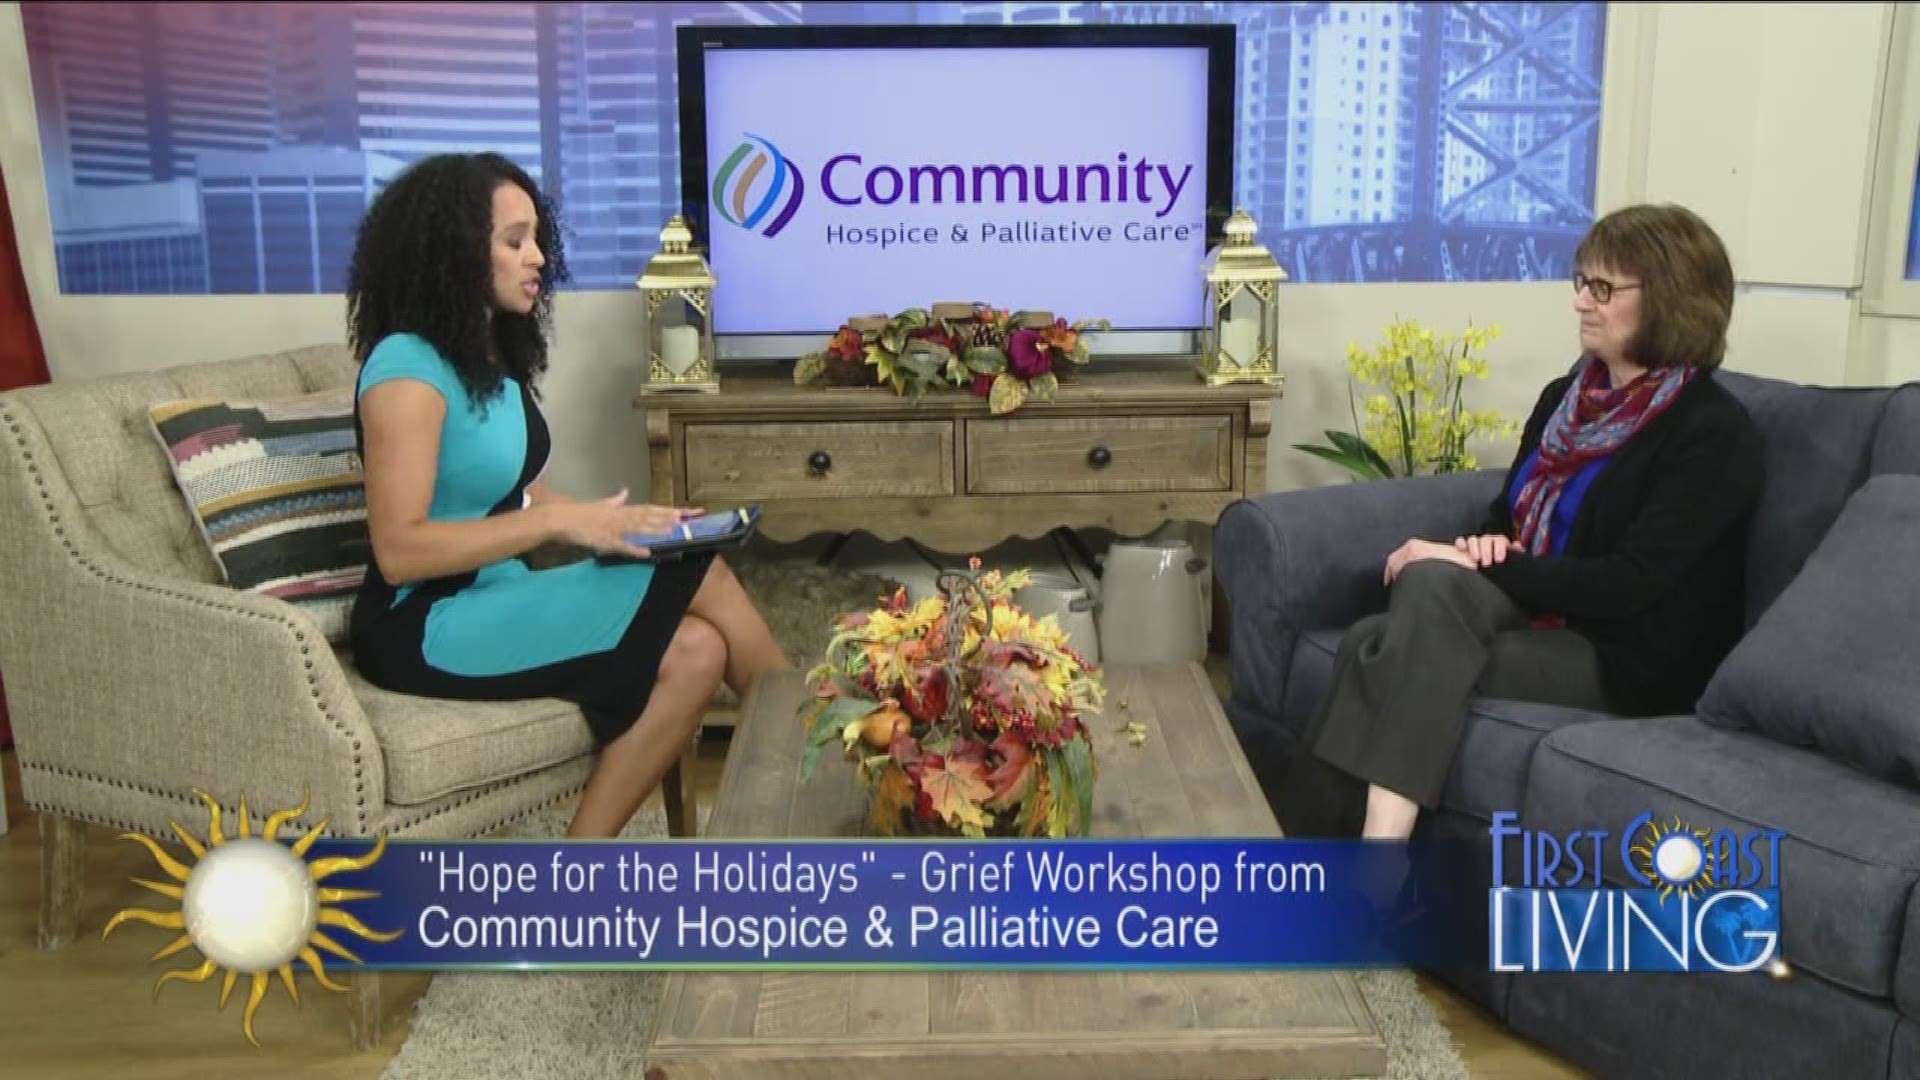 Grief workshop from Community Hospice & Palliative Care